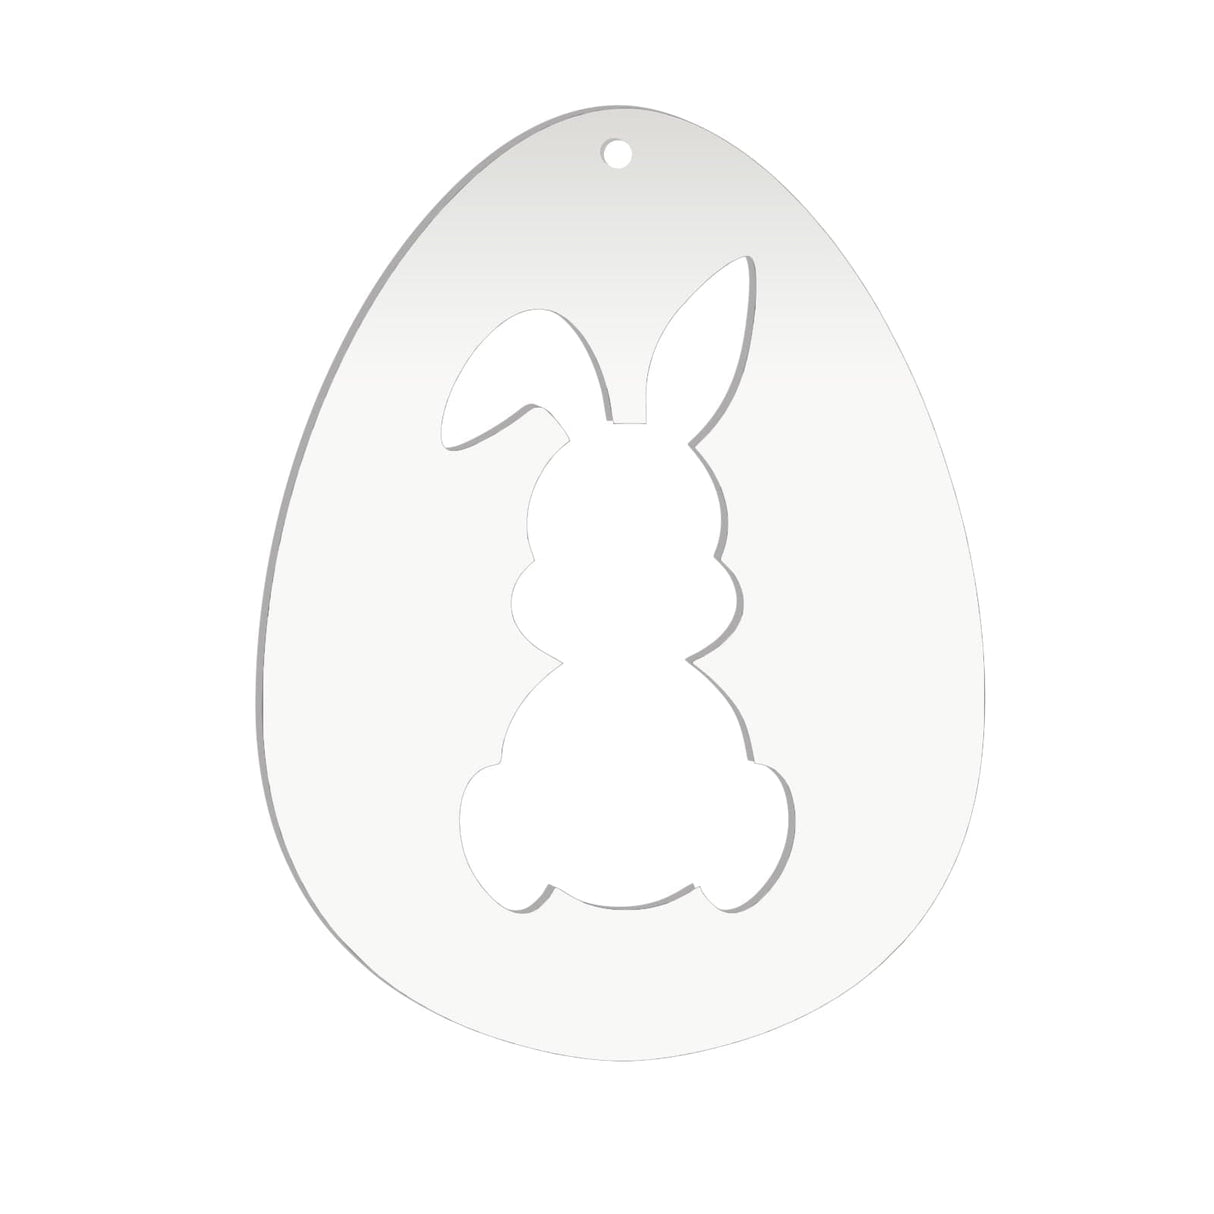 Laserworksuk craft eggs Acrylic Easter Egg With Bunny Cutout - (6cm Pack of 7)